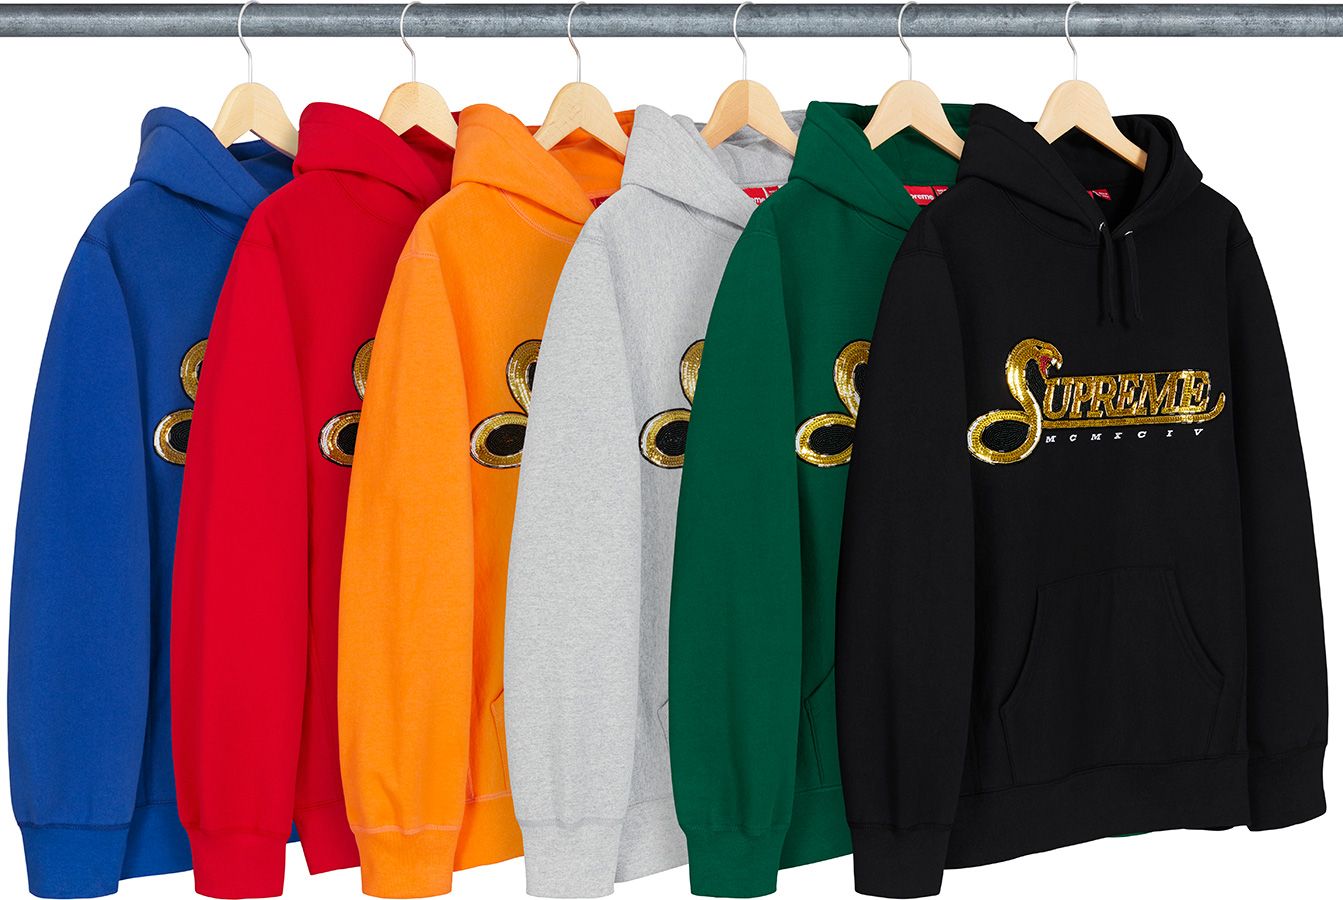 Sequin Viper Hooded Sweatshirt - Fall/Winter 2019 Preview – Supreme